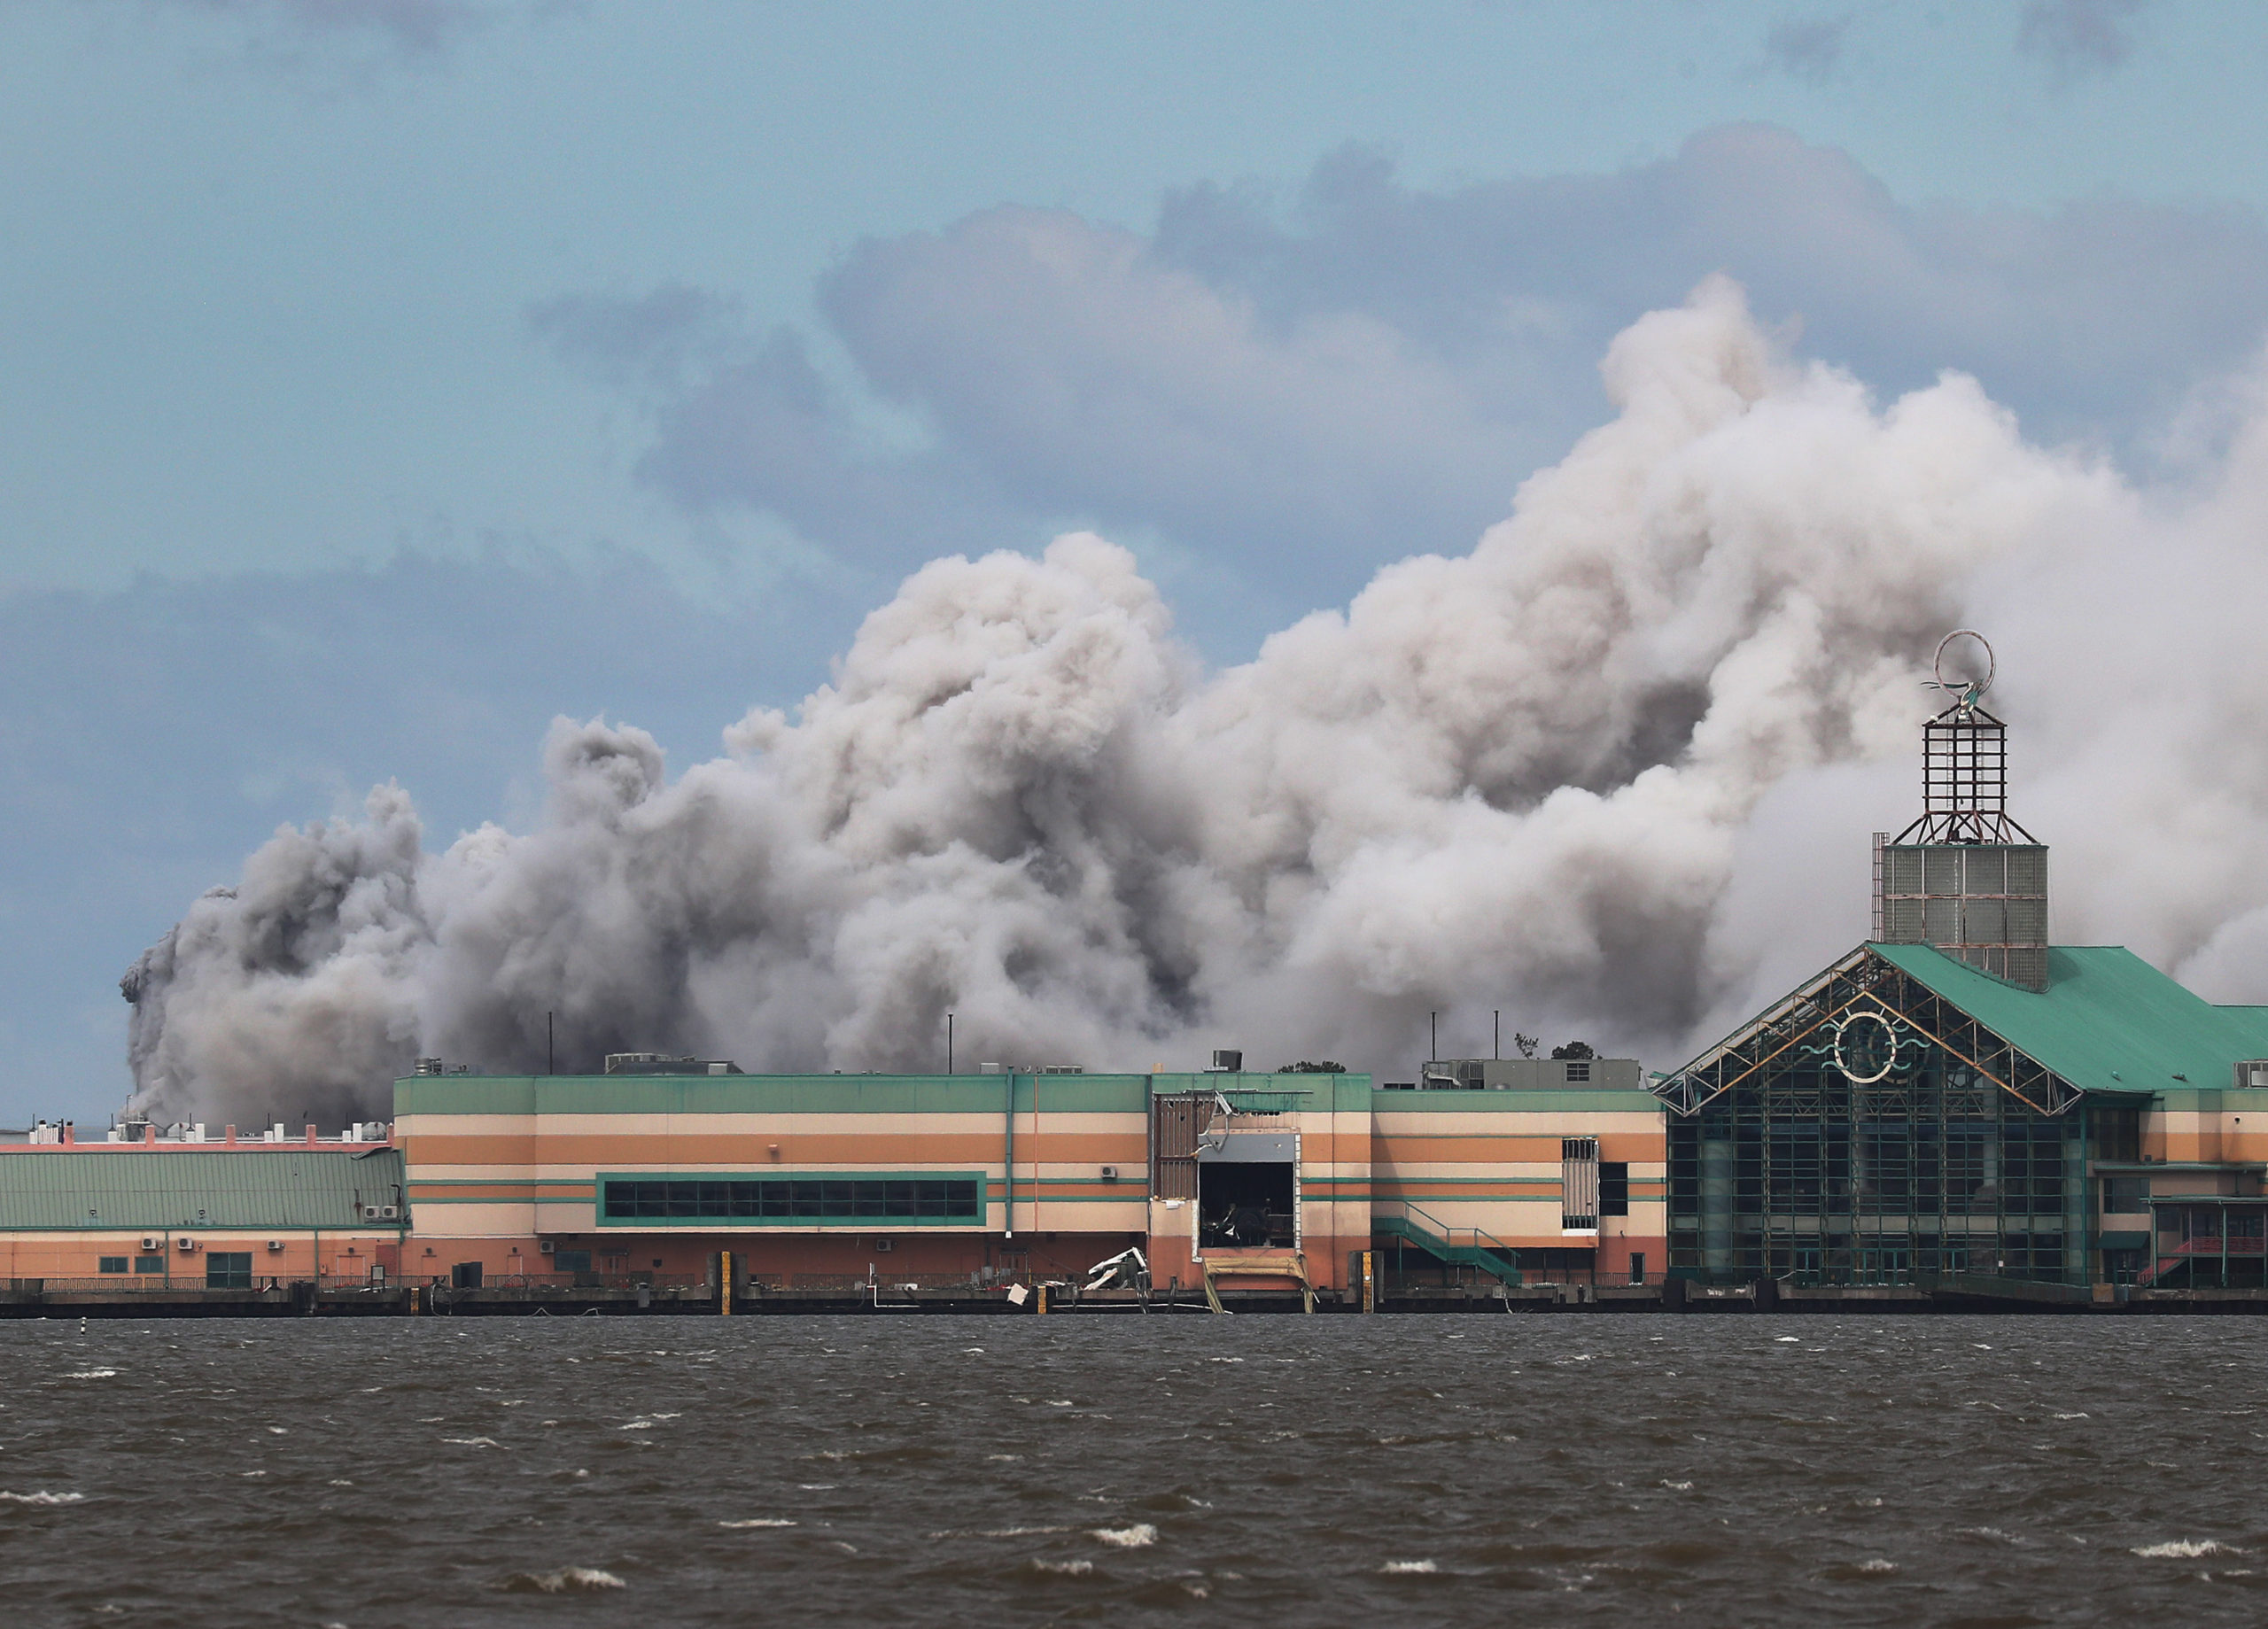 Smoke is seen rising from what is reported to be a chemical plant fire after Hurricane Laura passed through the area on Aug. 27, 2020 in Lake Charles, Louisiana. The hurricane hit with powerful winds causing extensive damage to the city. (Photo: Joe Raedle, Getty Images)